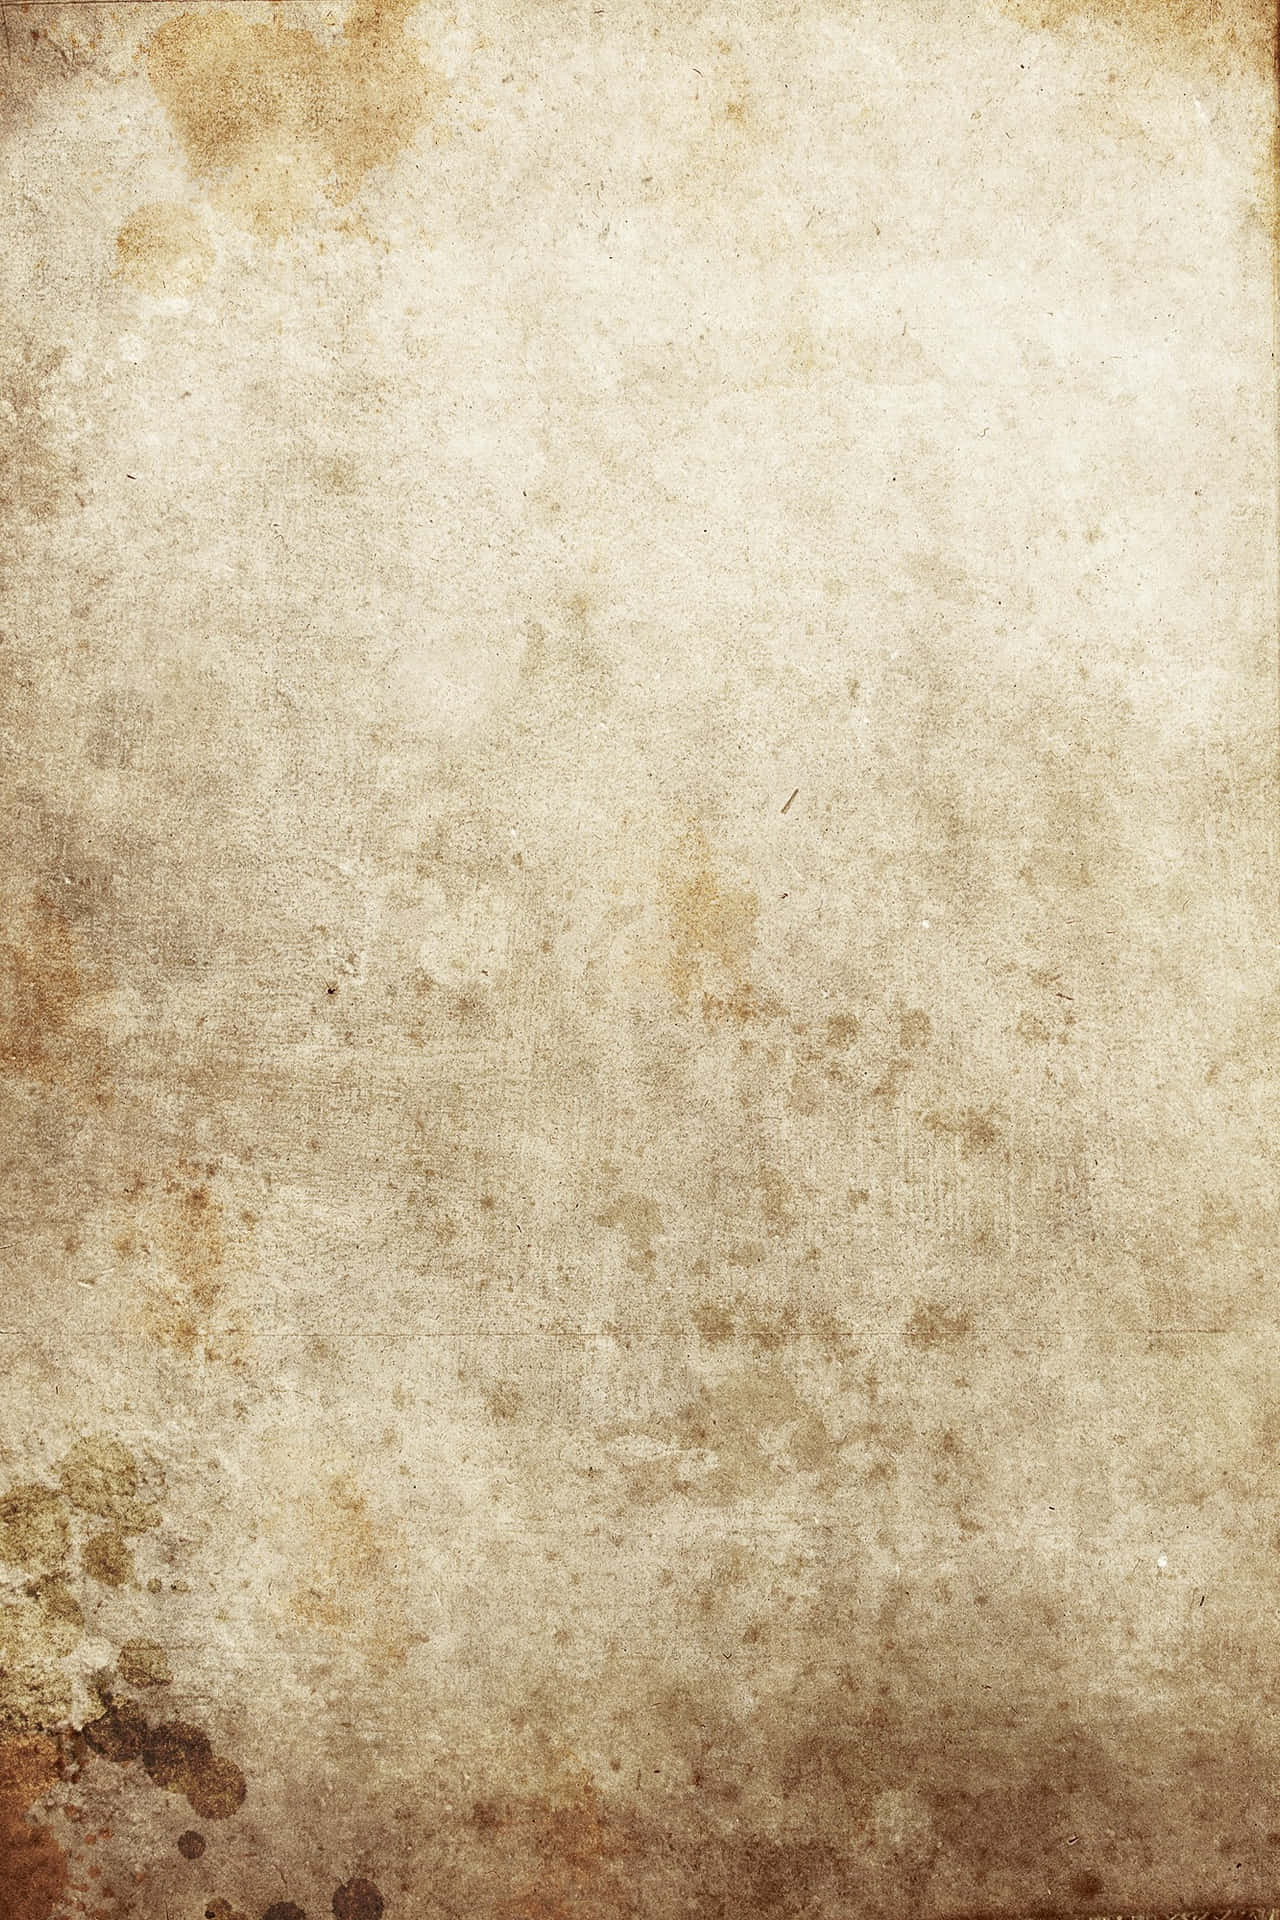 An Old Paper Background With A Brown Color